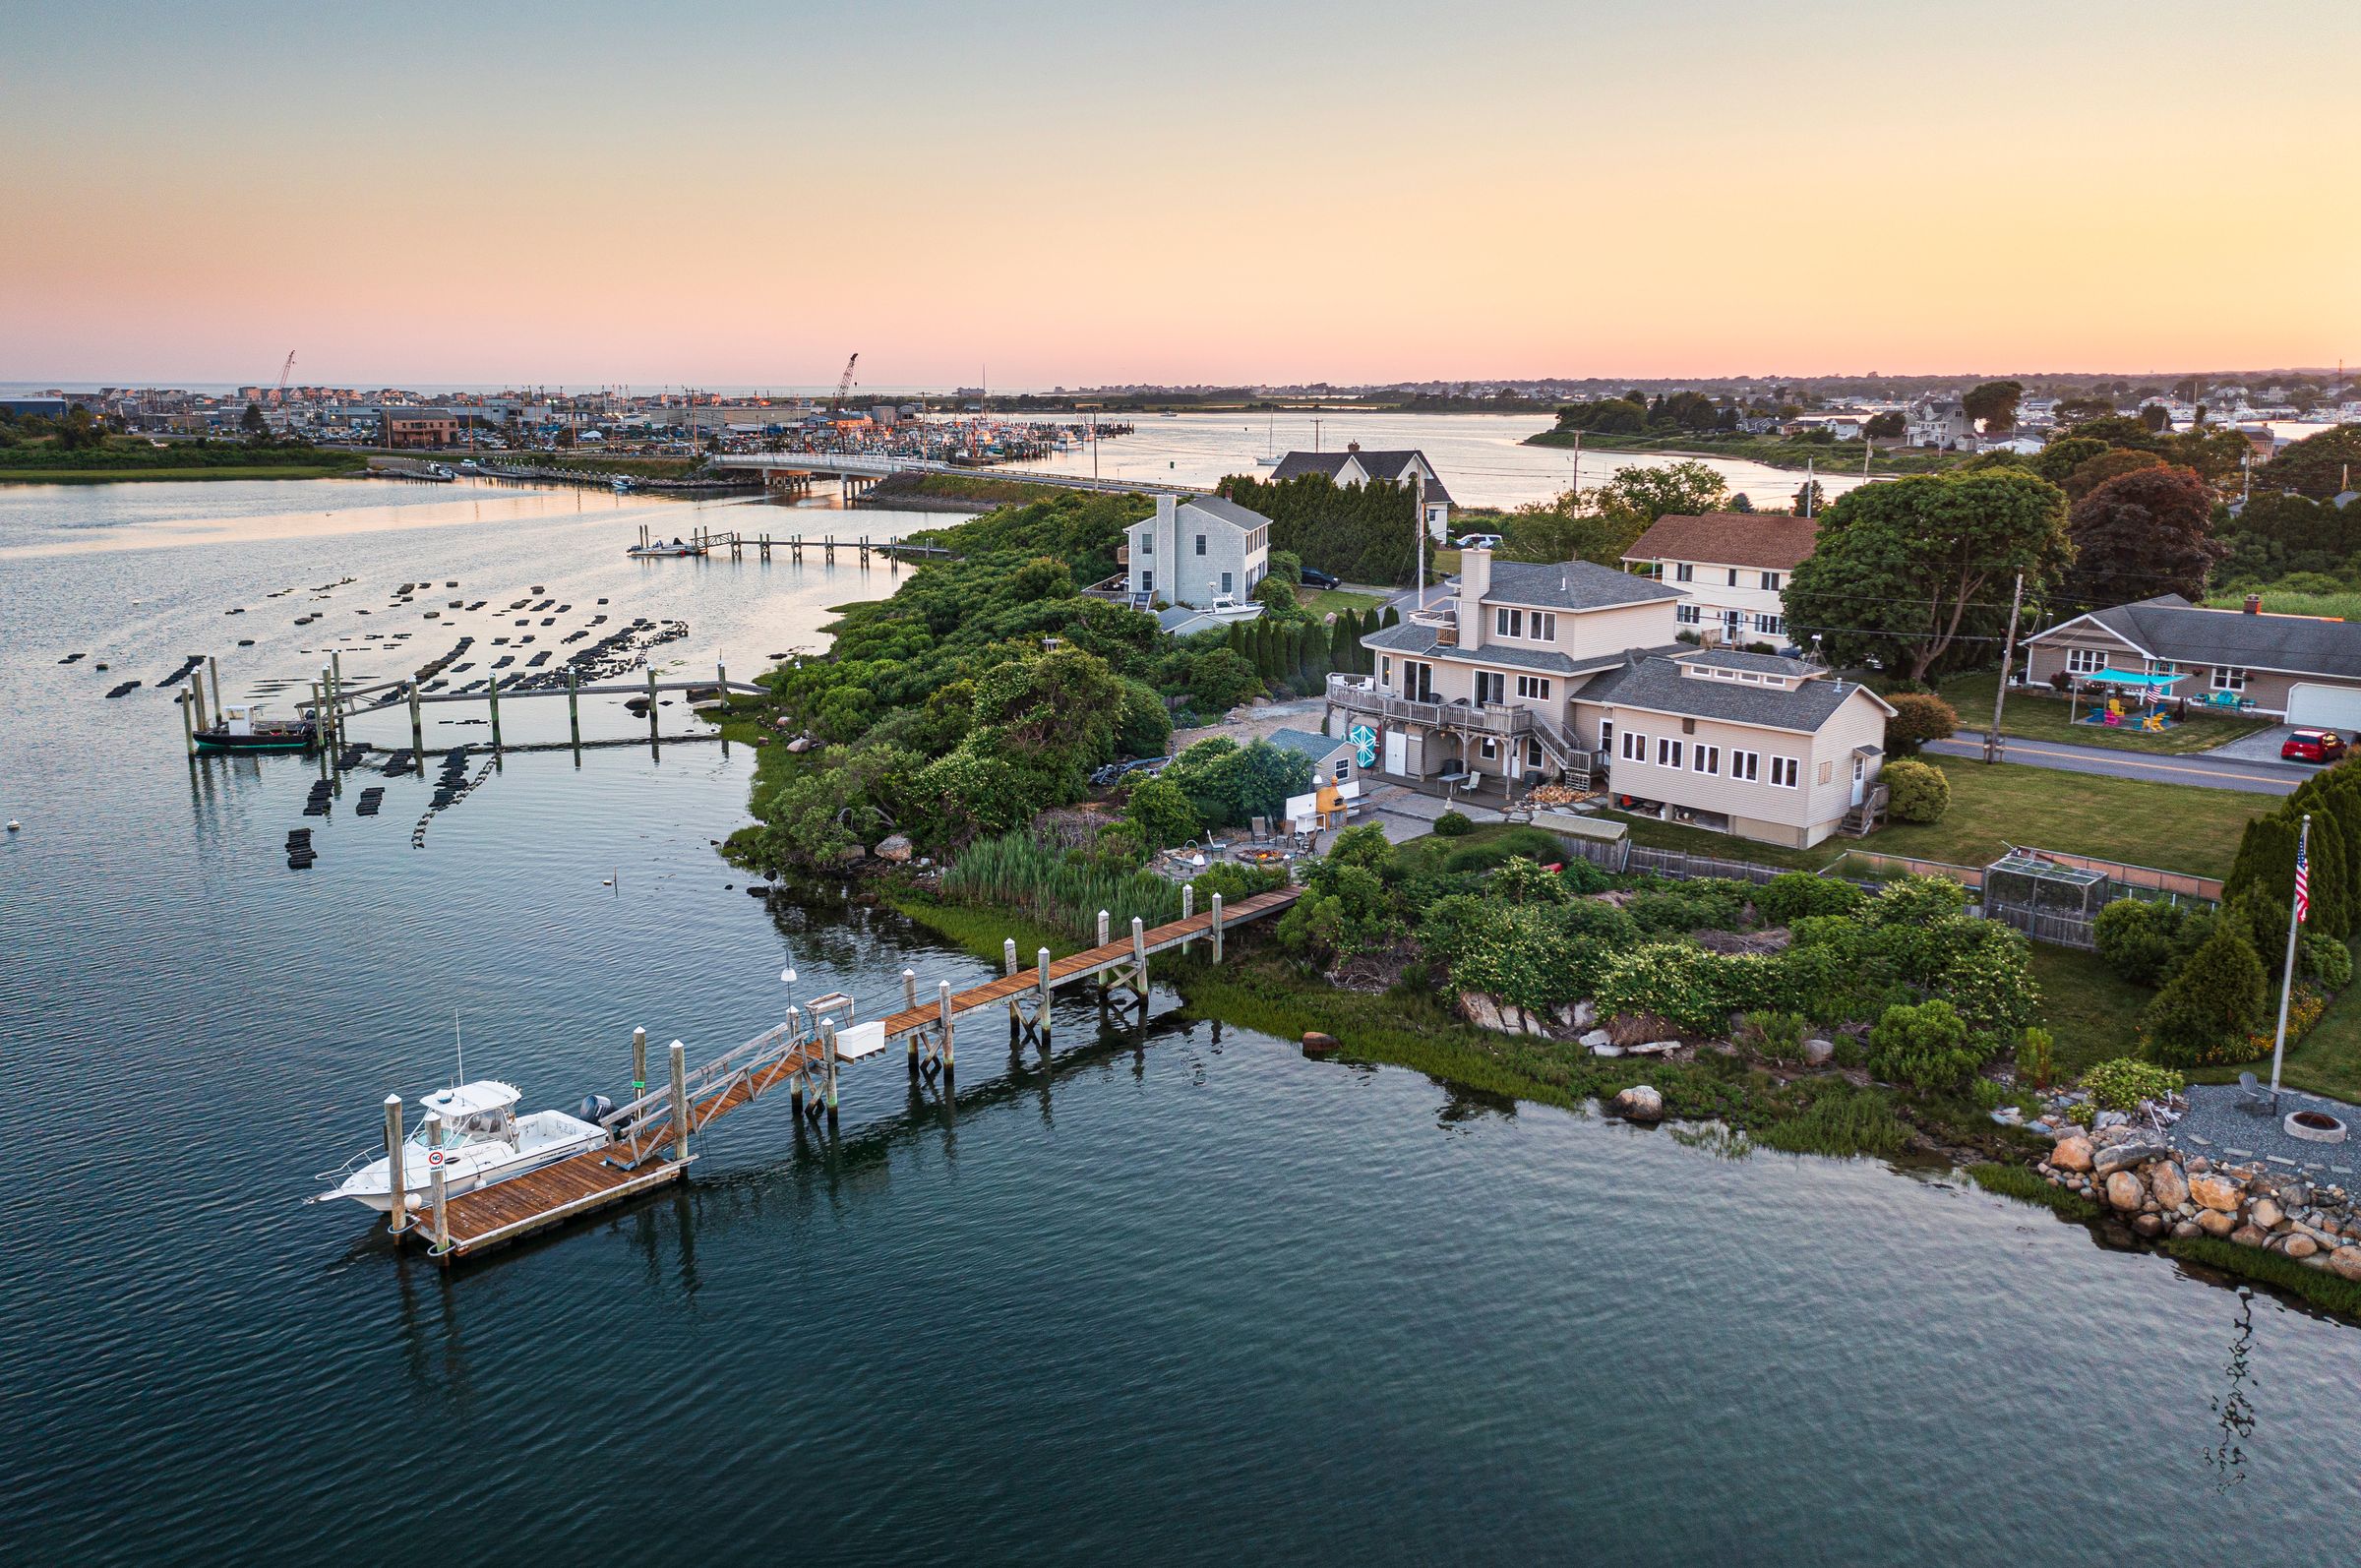 SALE OF WATERFRONT NARRAGANSETT HOME MARKS THE HIGHEST SALE IN THE HISTORY OF GREAT ISLAND